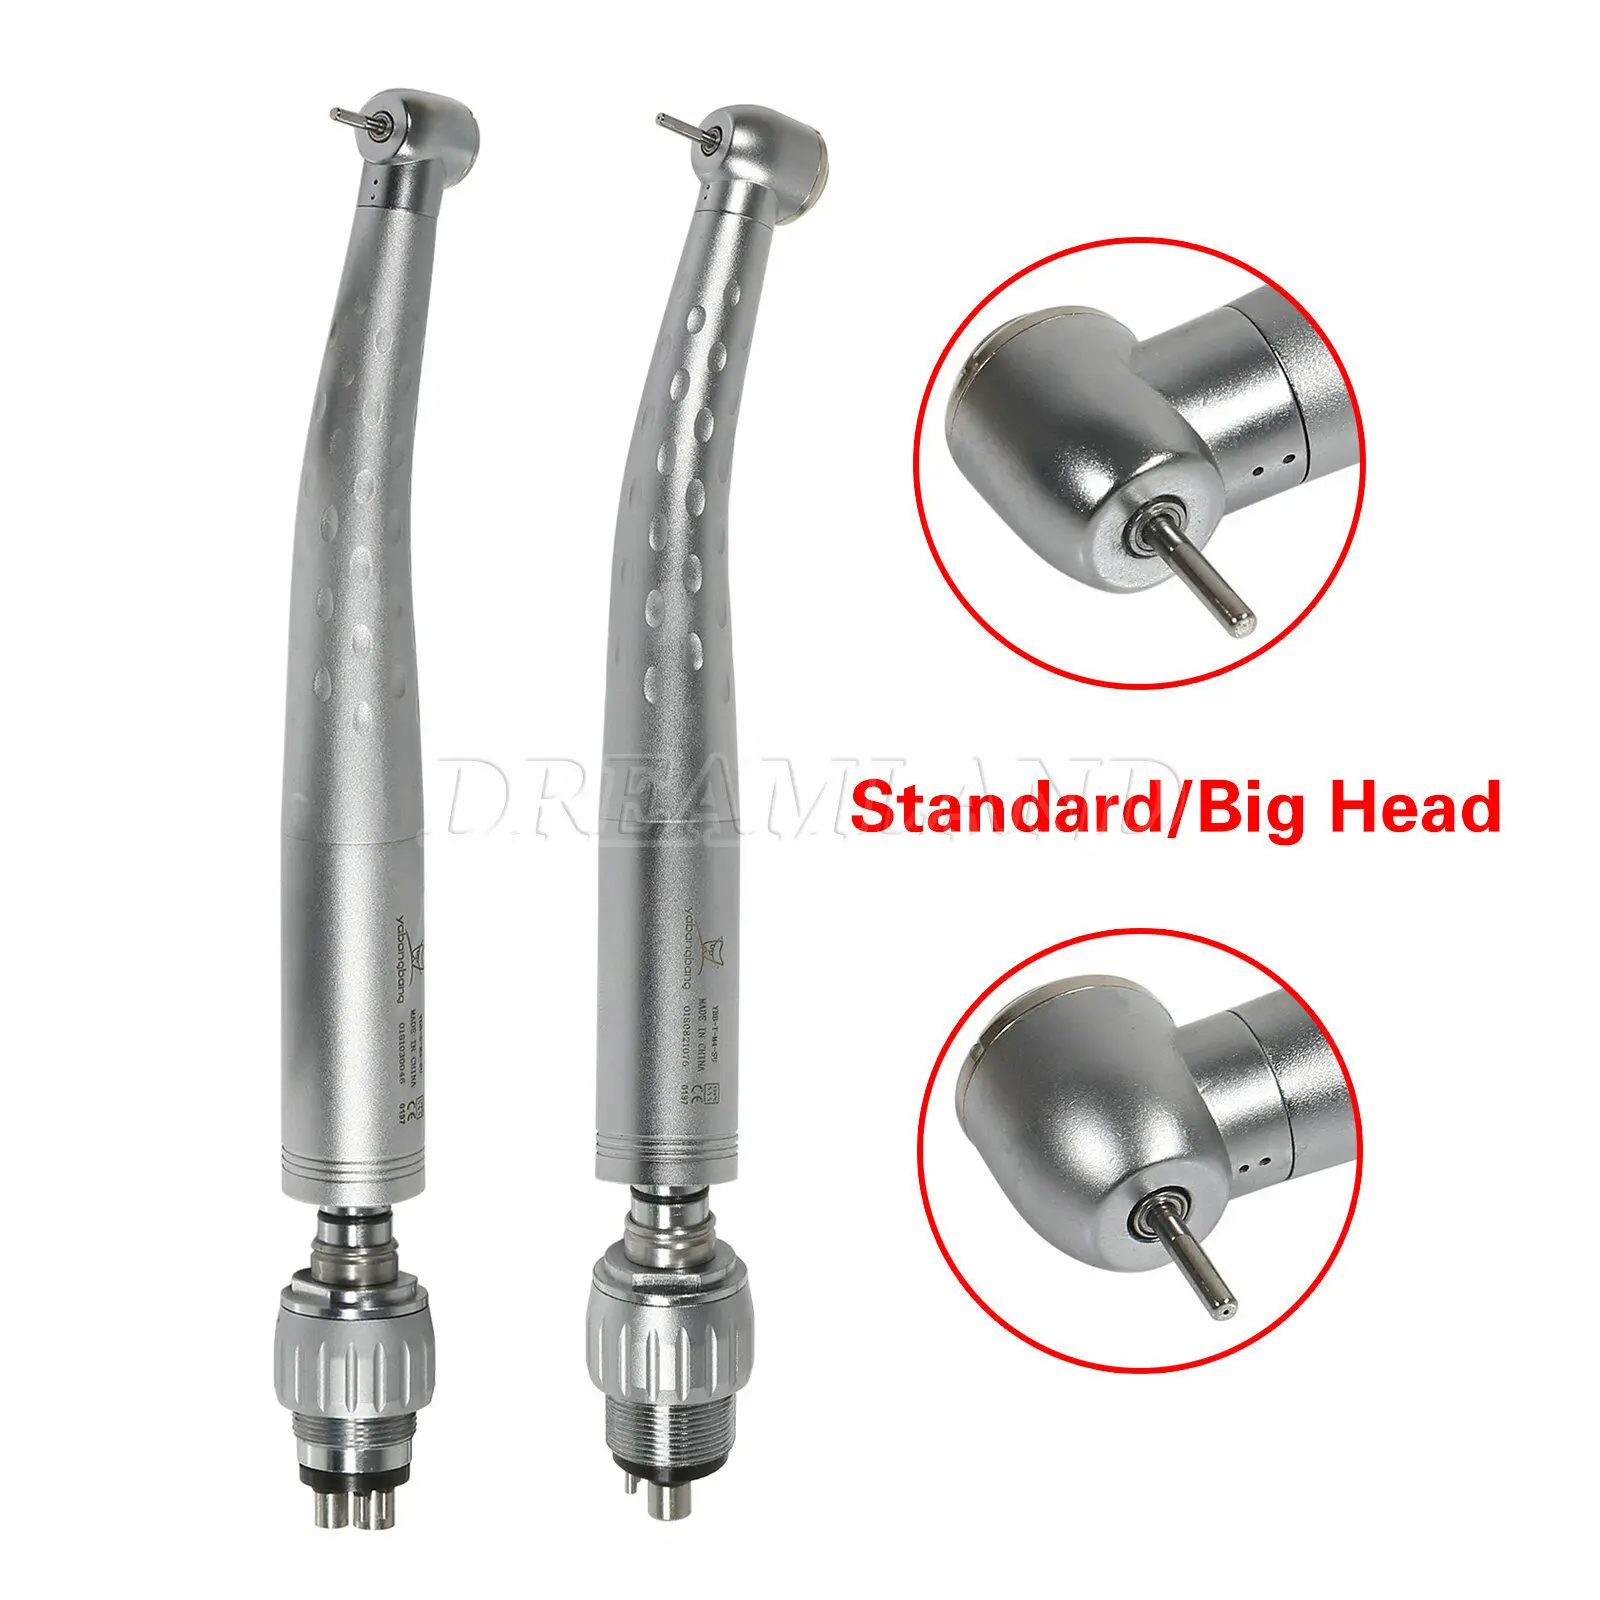 

KaVo/Nsk Style Dental High Speed Handpiece Standard/Large Head Push Button Turbine With 4Hole Quick Coupling Coupler Swivel